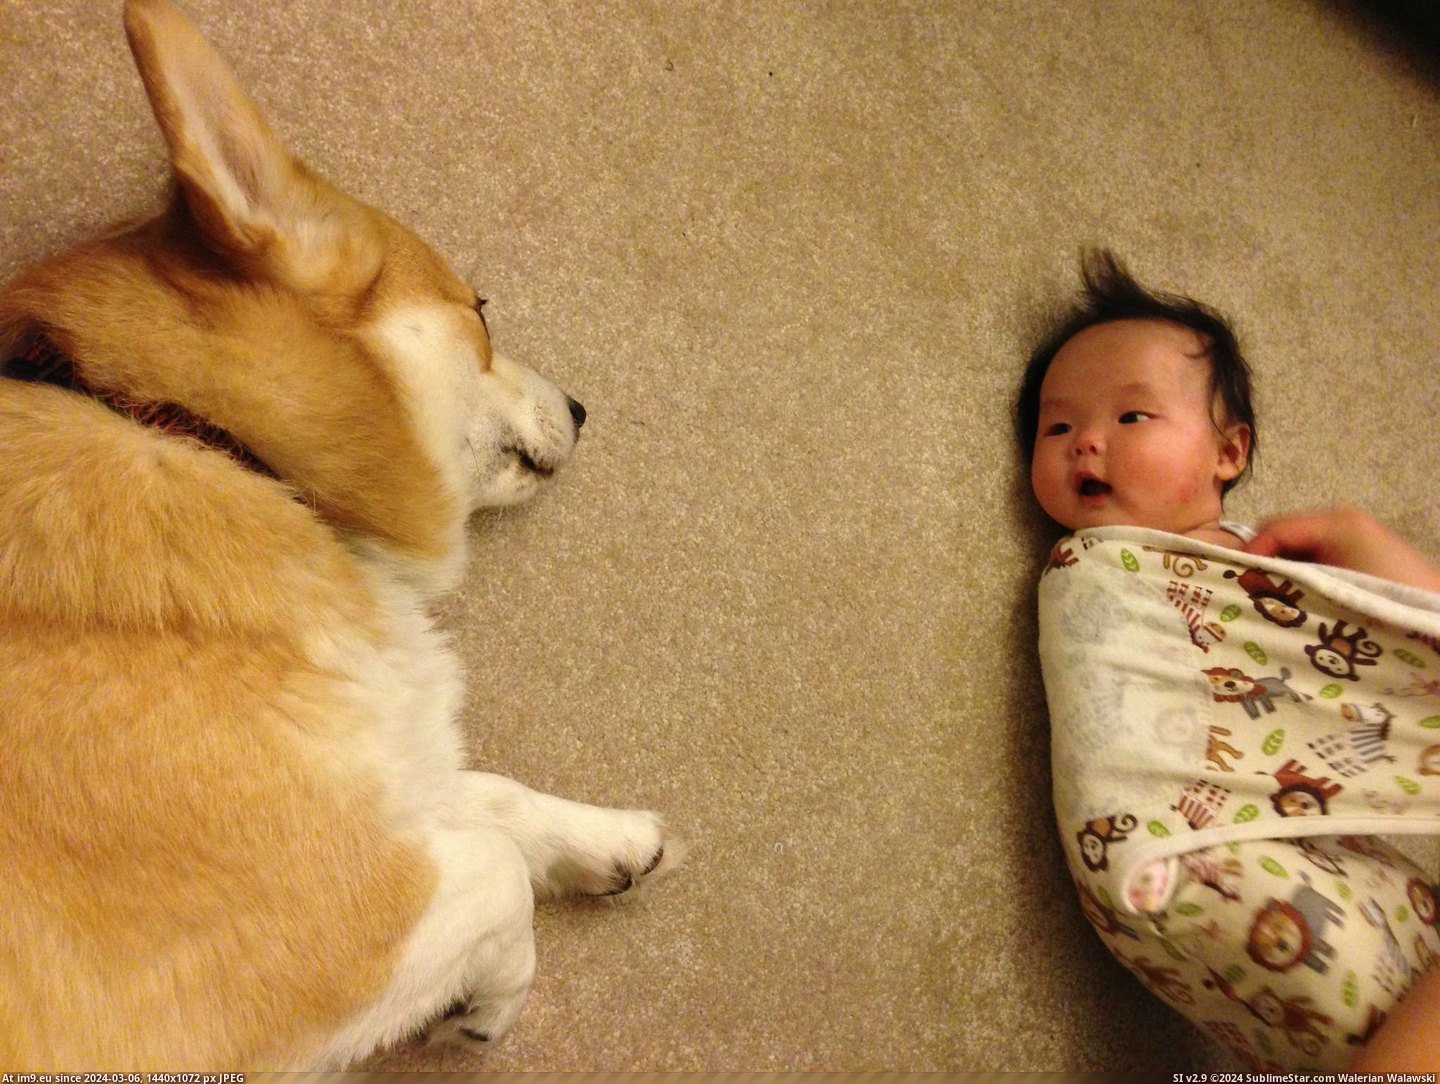 #Old #Likes #Daughter #Depressed #Counseli #Psychiatrist #Month #Corgi #Lie [Aww] My corgi likes to lie down next to my 4 month old daughter. It looks like he's depressed and she's a psychiatrist counseli Pic. (Obraz z album My r/AWW favs))